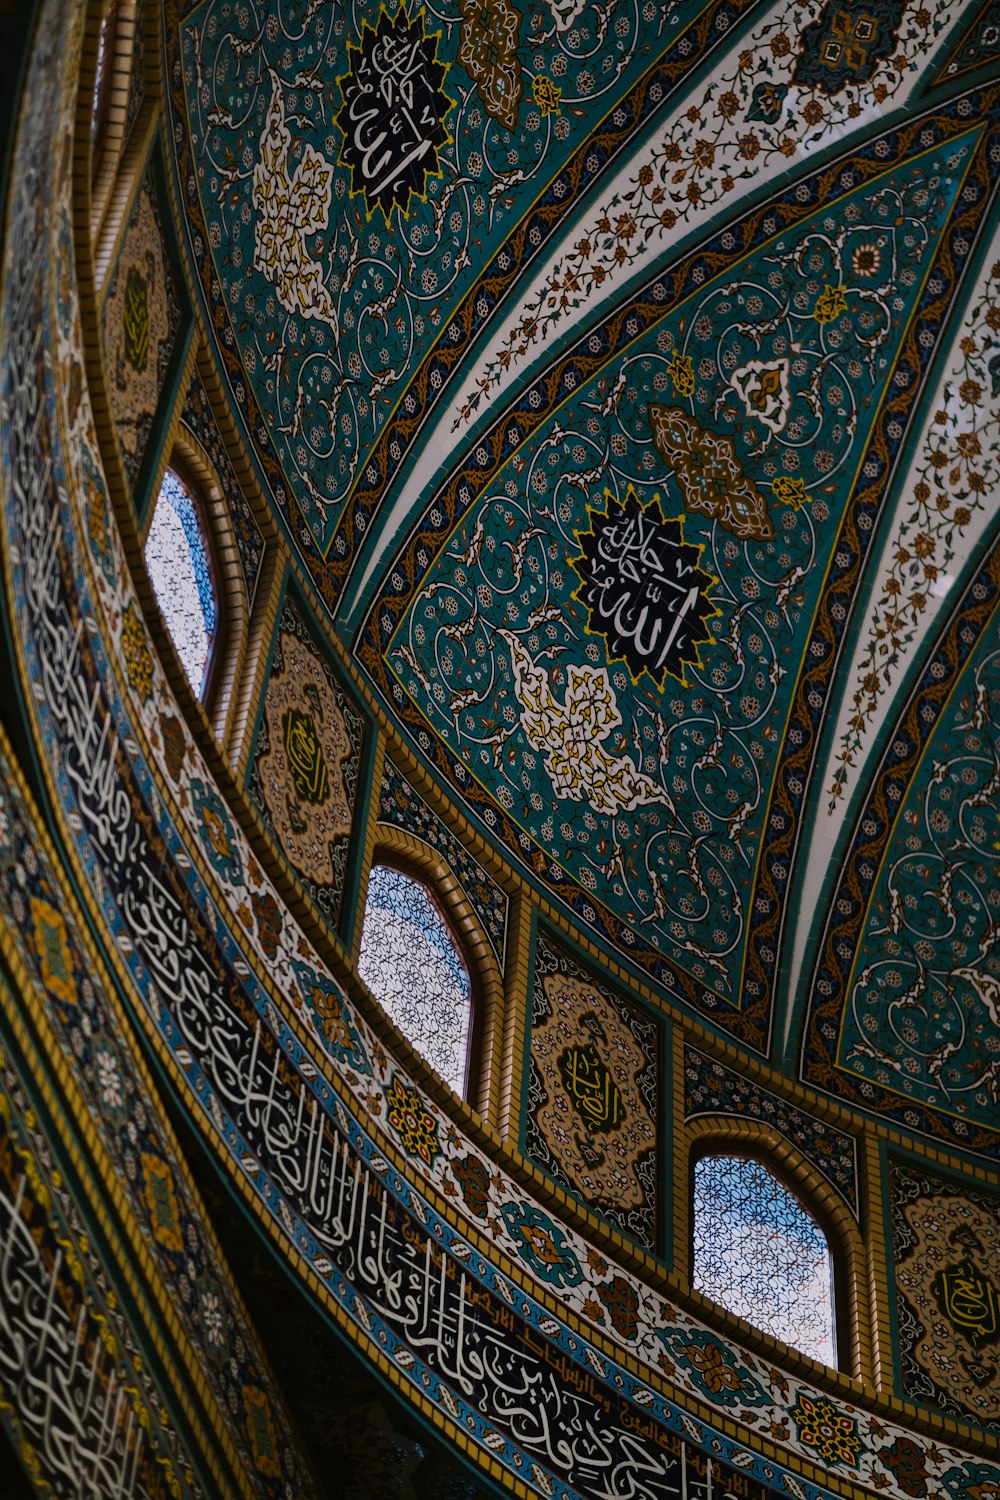 a close up view of the ceiling of a building